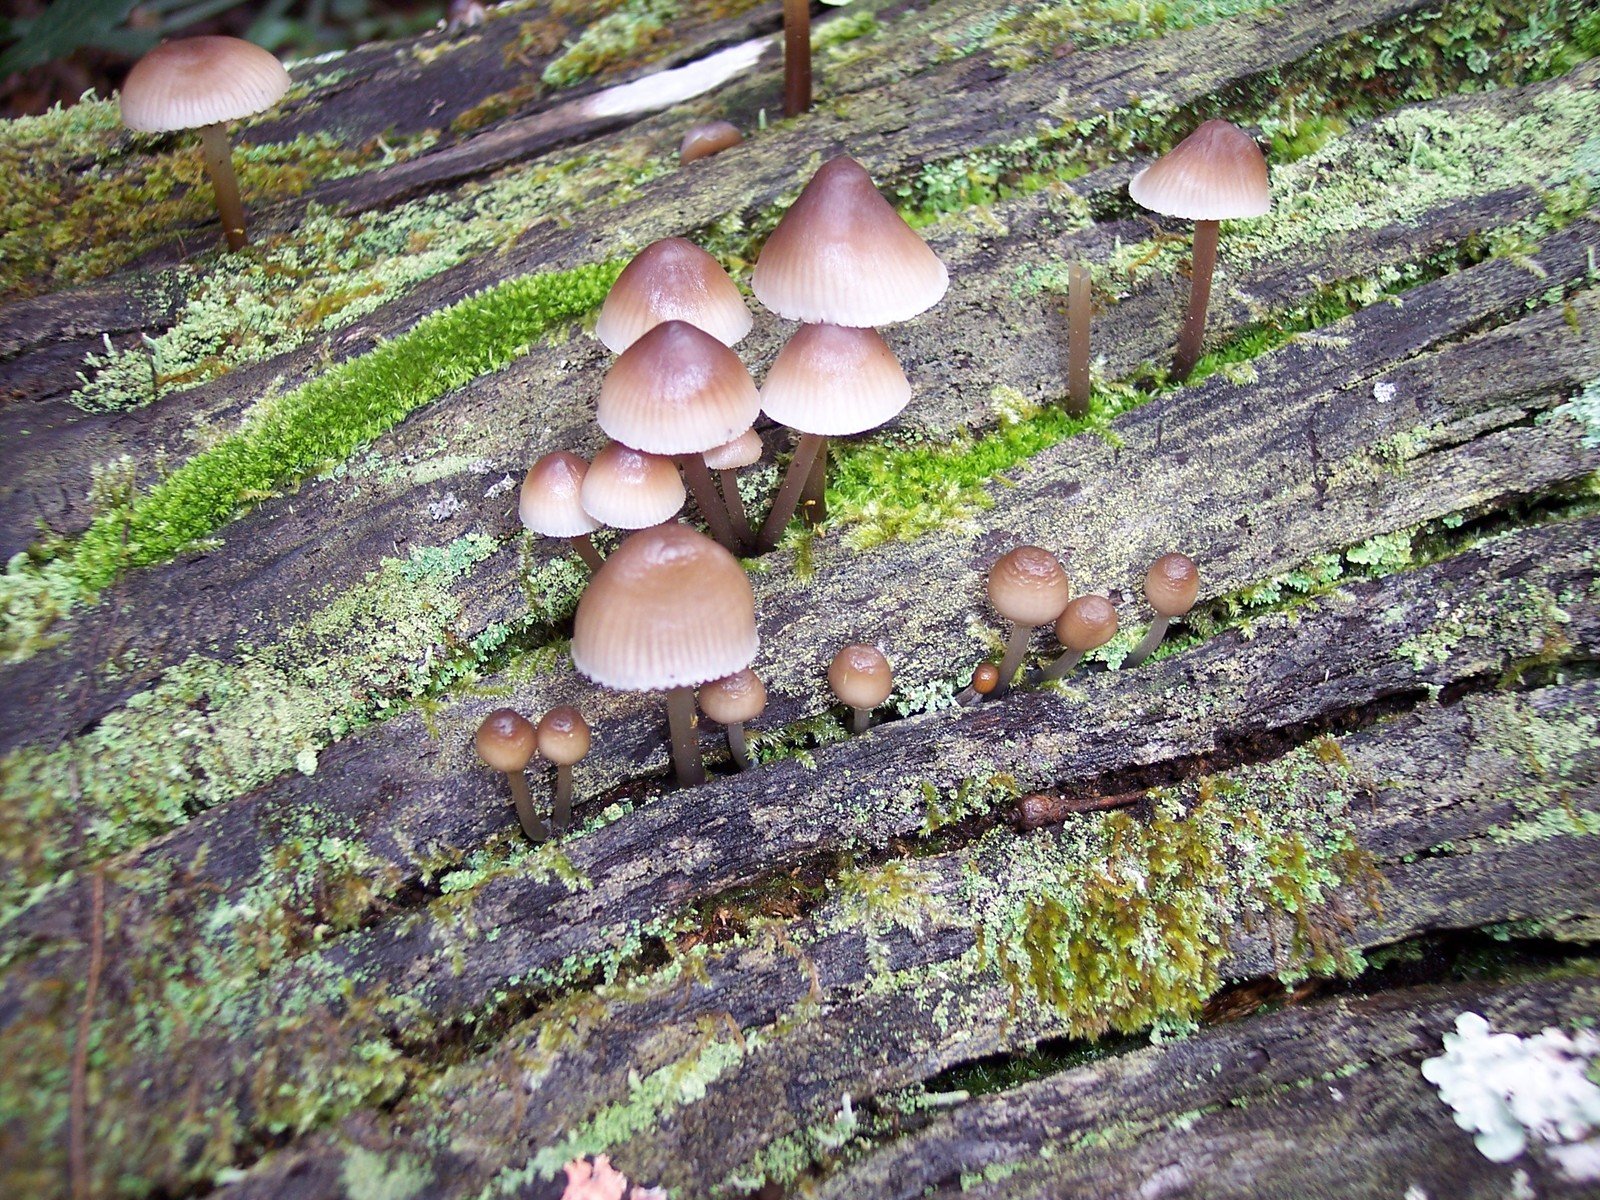 several mushrooms growing out of moss on a tree stump